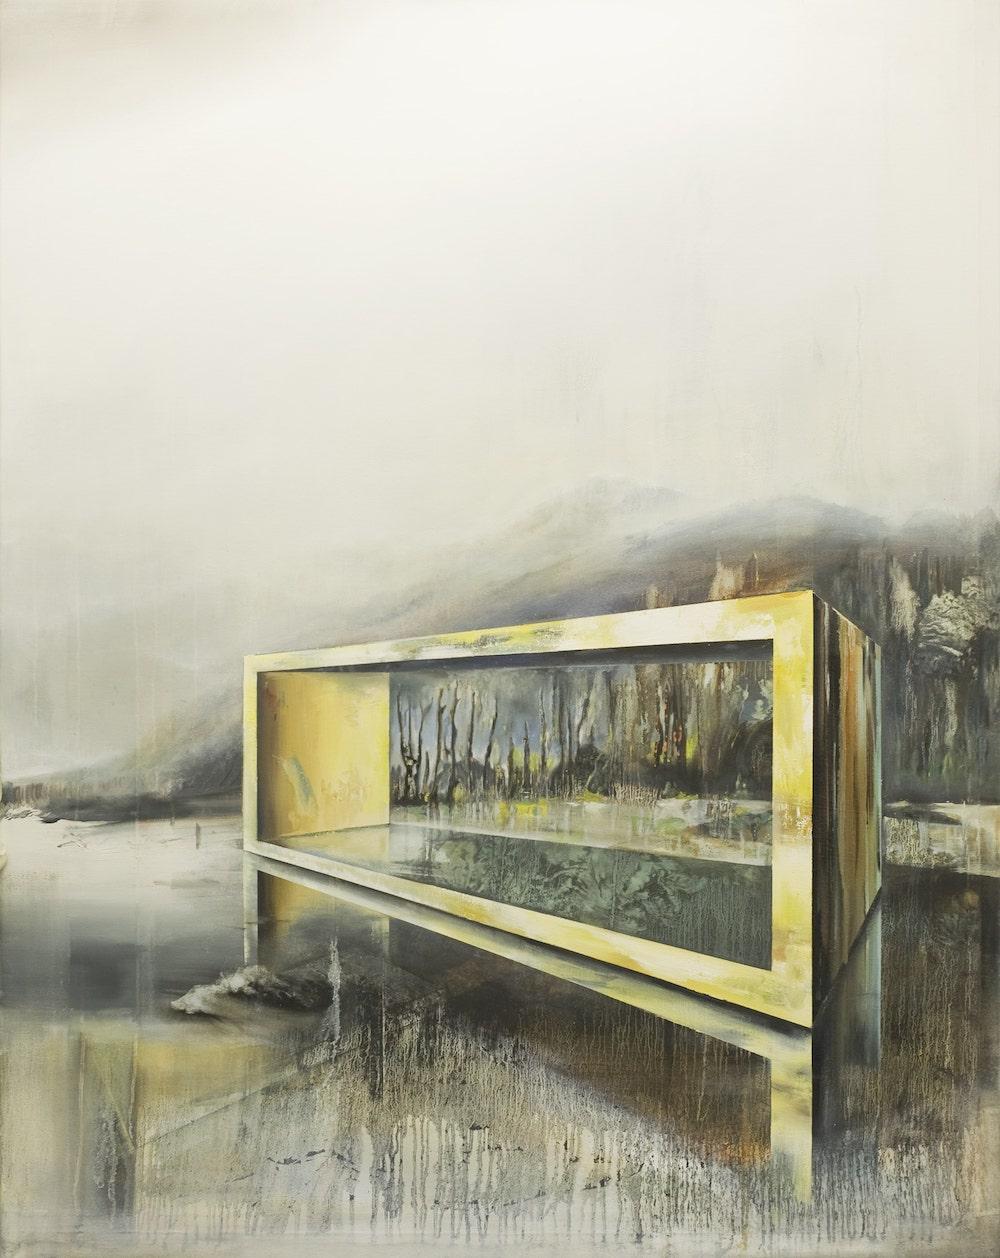 Wandelsgrund is a unique oil on canvas painting by contemporary artist Emanuel Schulze, dimensions are 140 × 110 cm (55.1 × 43.3 in).
The artwork is signed, sold unframed and comes with a certificate of authenticity.

This piece of art depicts an